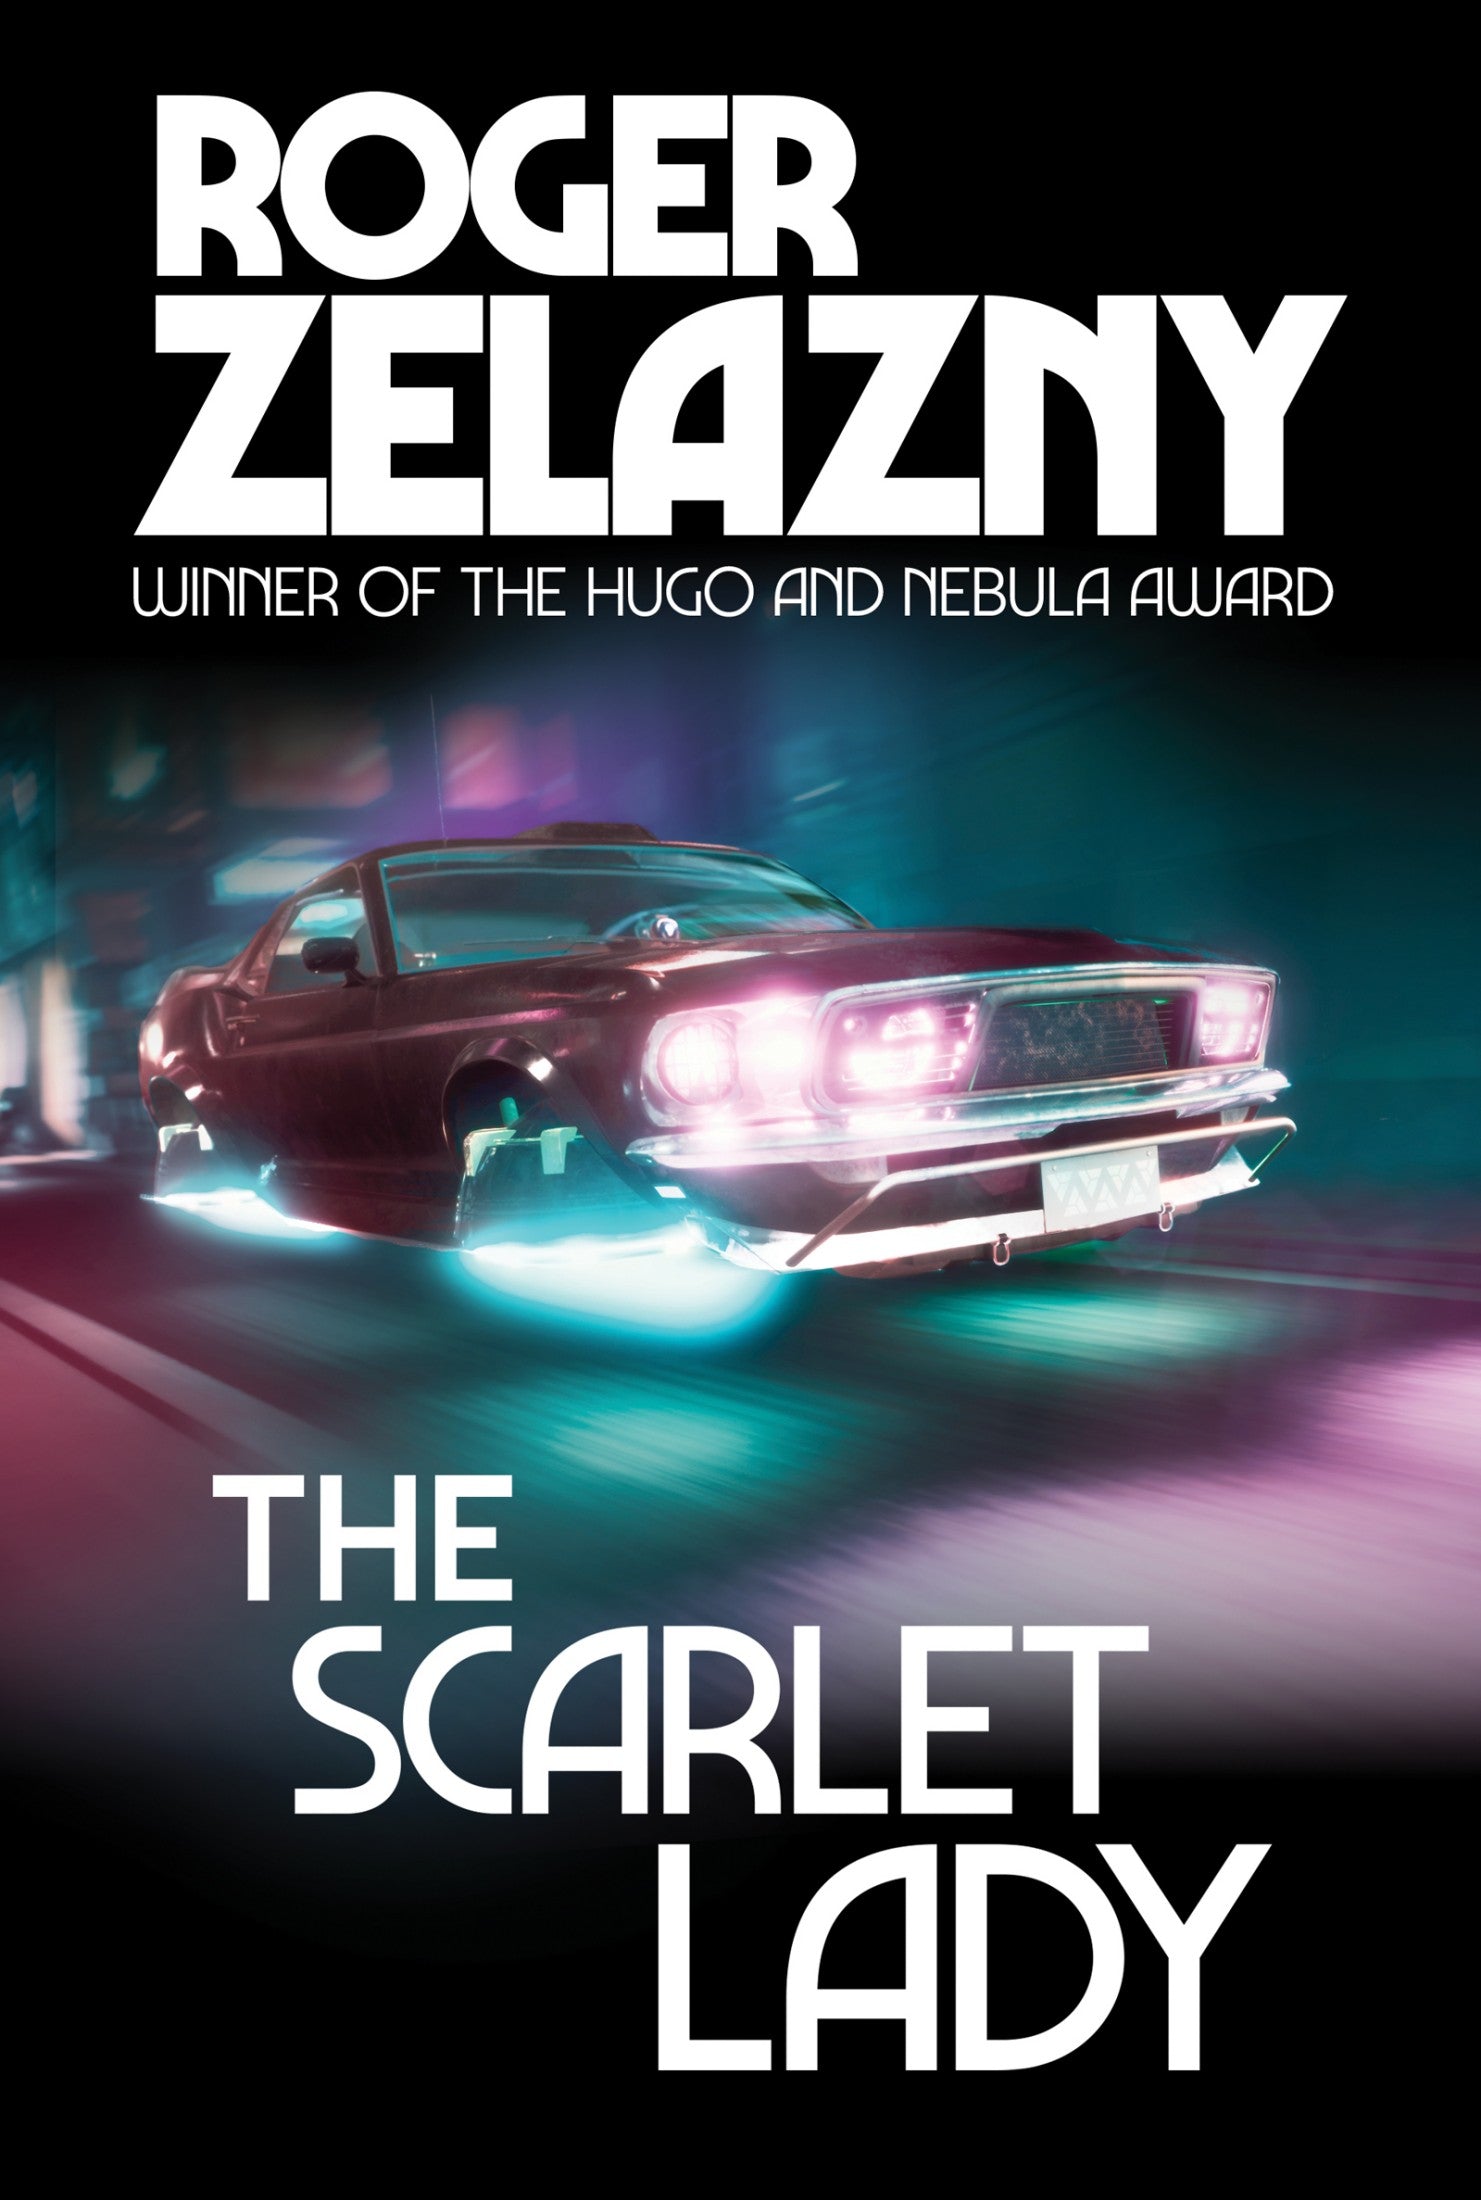 Cover art for The Scarlet Lady.